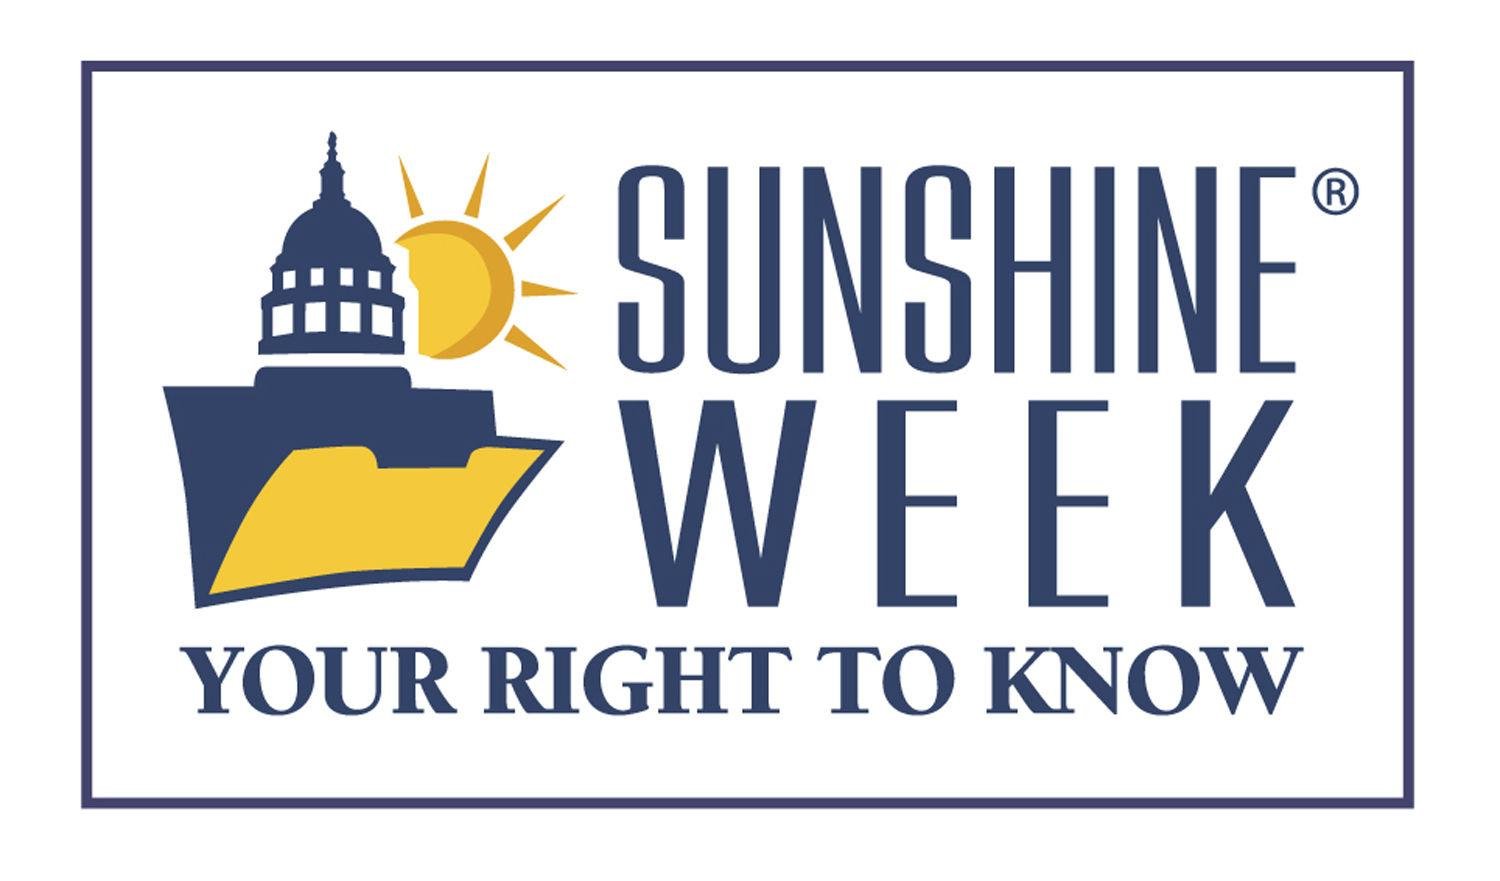 EDITORIAL ‘It’s your right to know’ during Sunshine Week Opinion